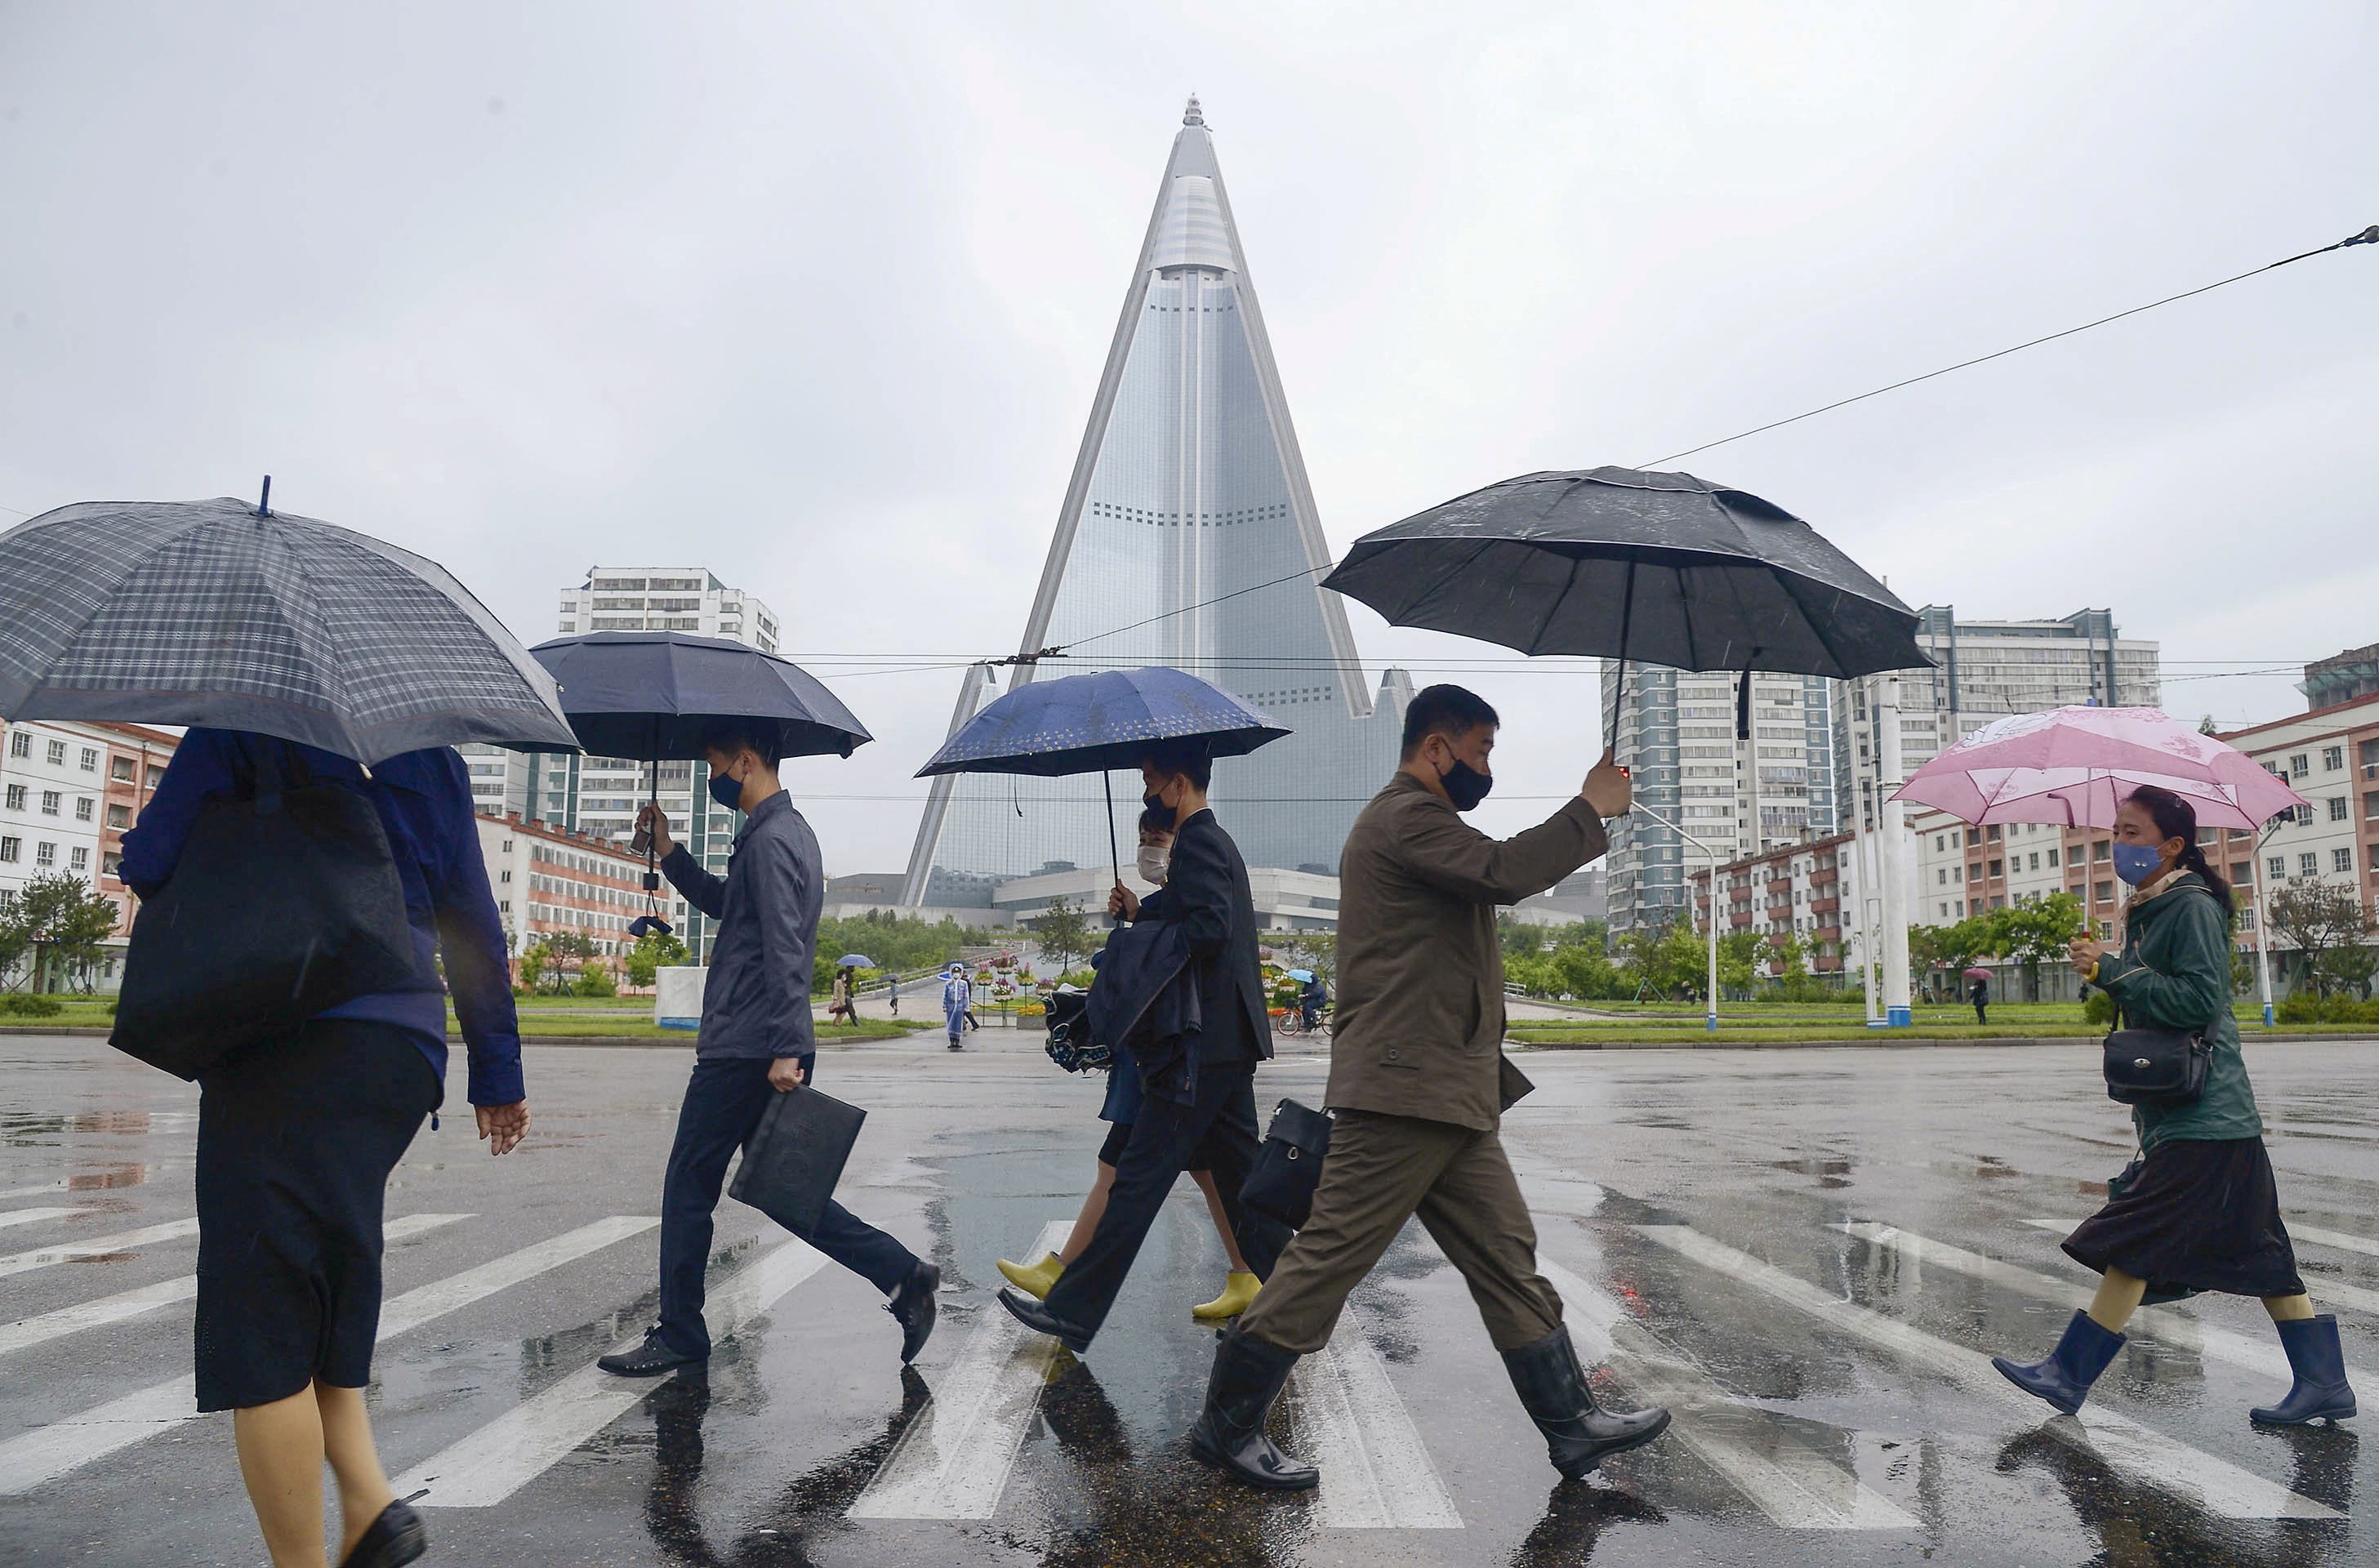 People wearing protective face masks walk amid concerns over the new coronavirus disease (COVID-19) in Pyongyang, North Korea